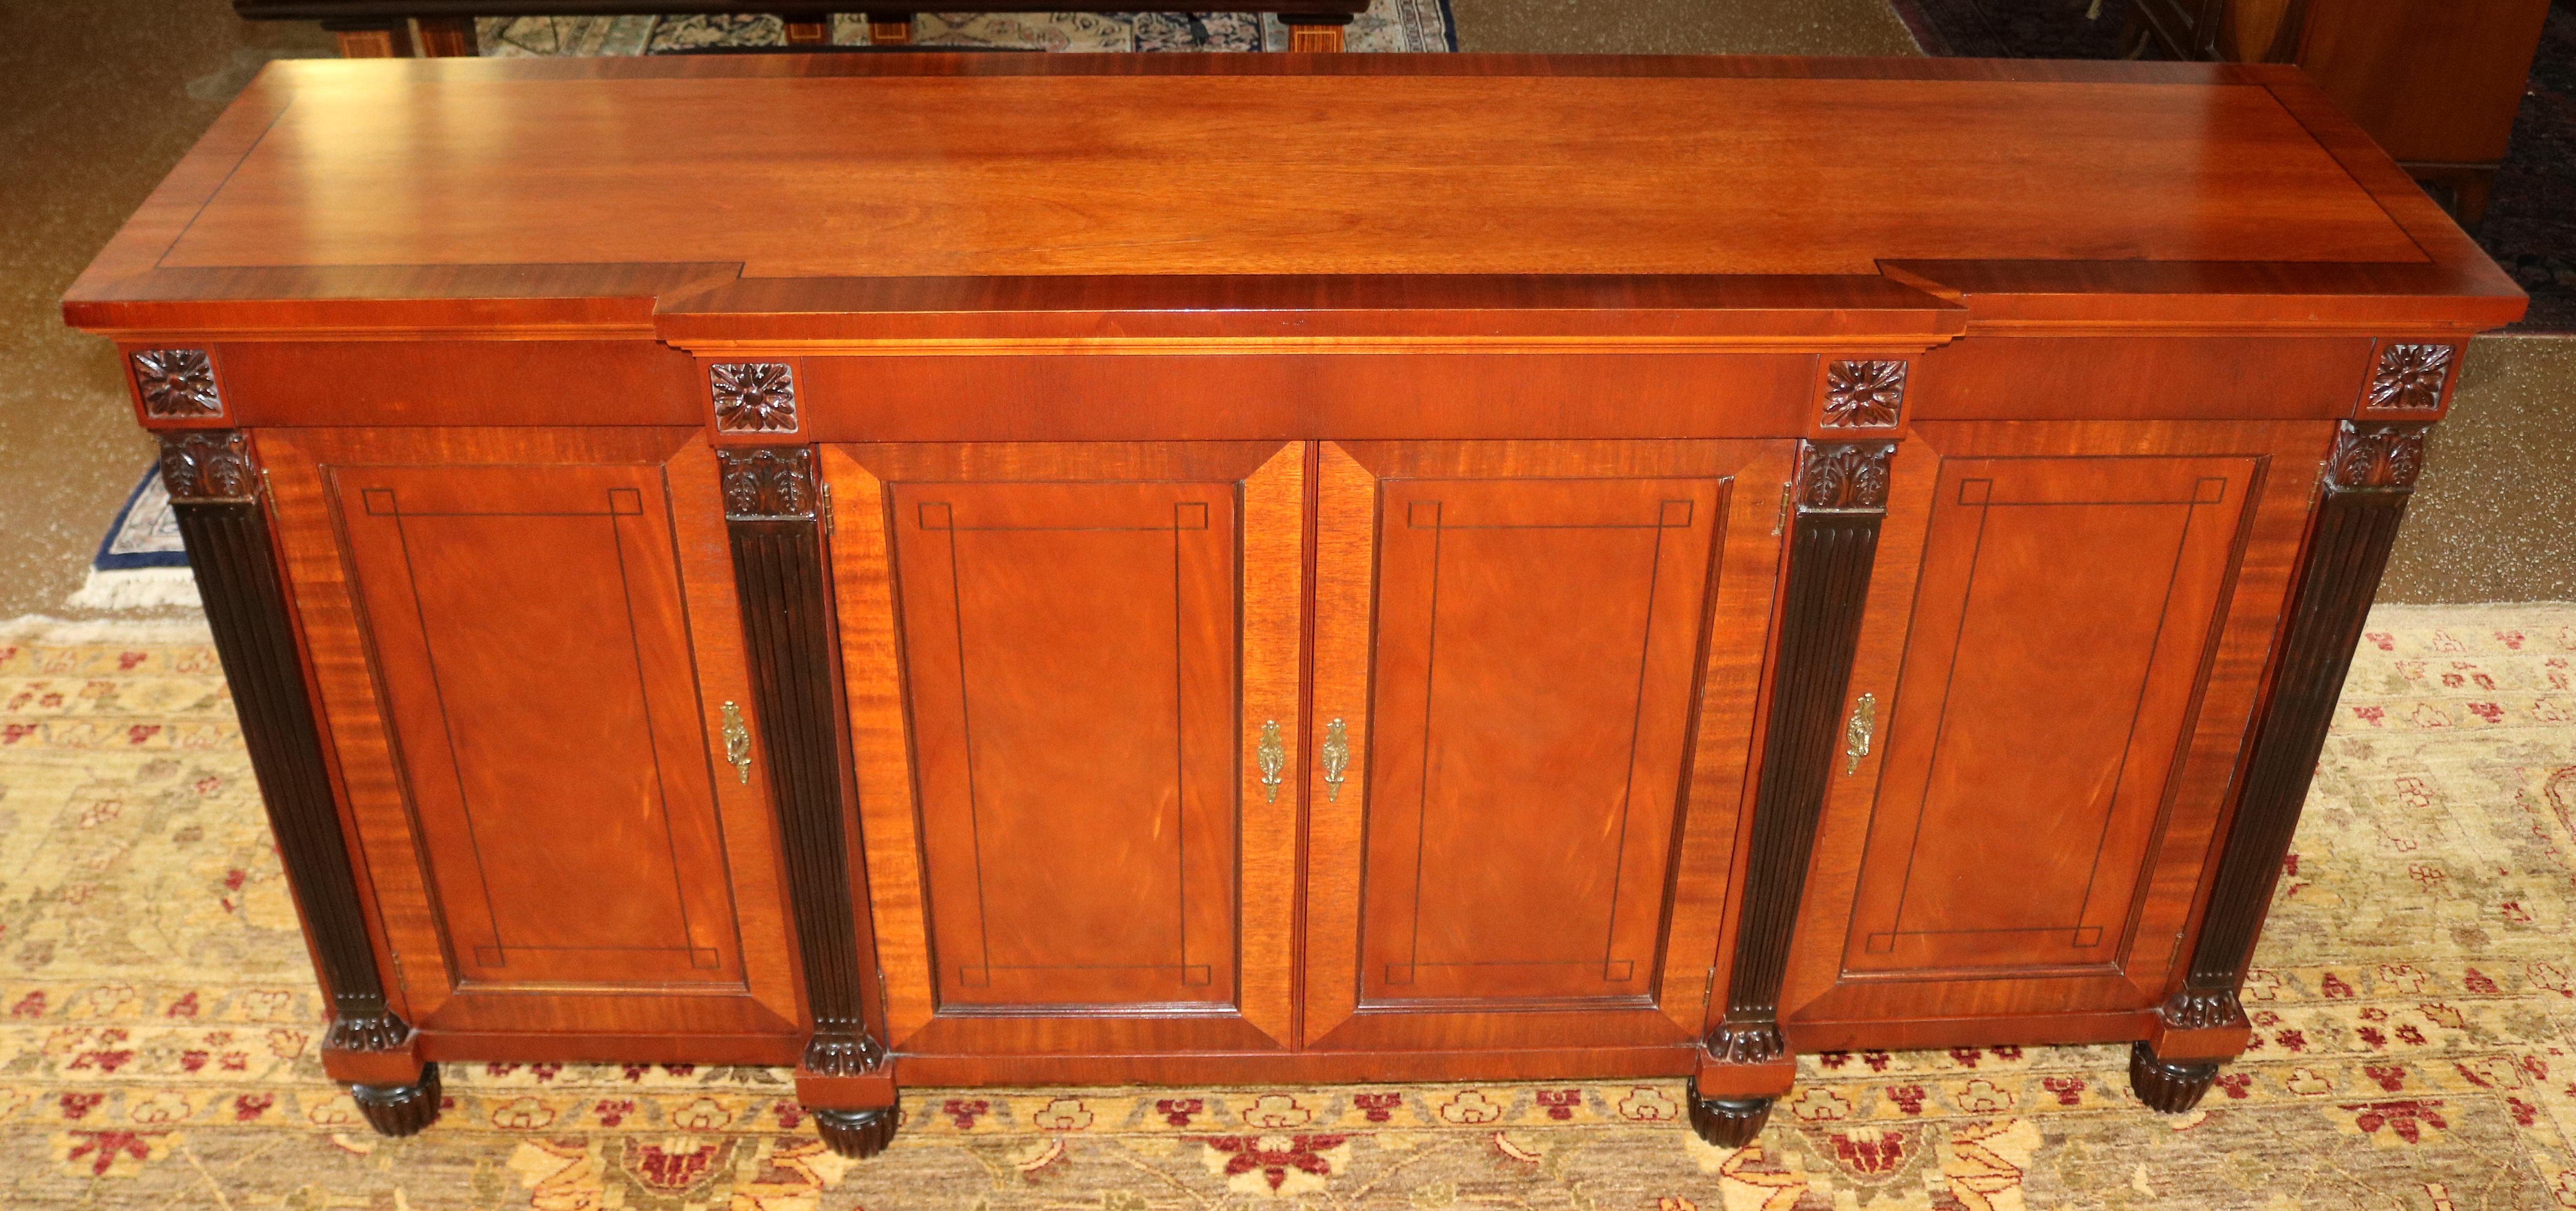 American Baker Mahogany Neoclassical French Empire Style Credenza Server Sideboard  Dime